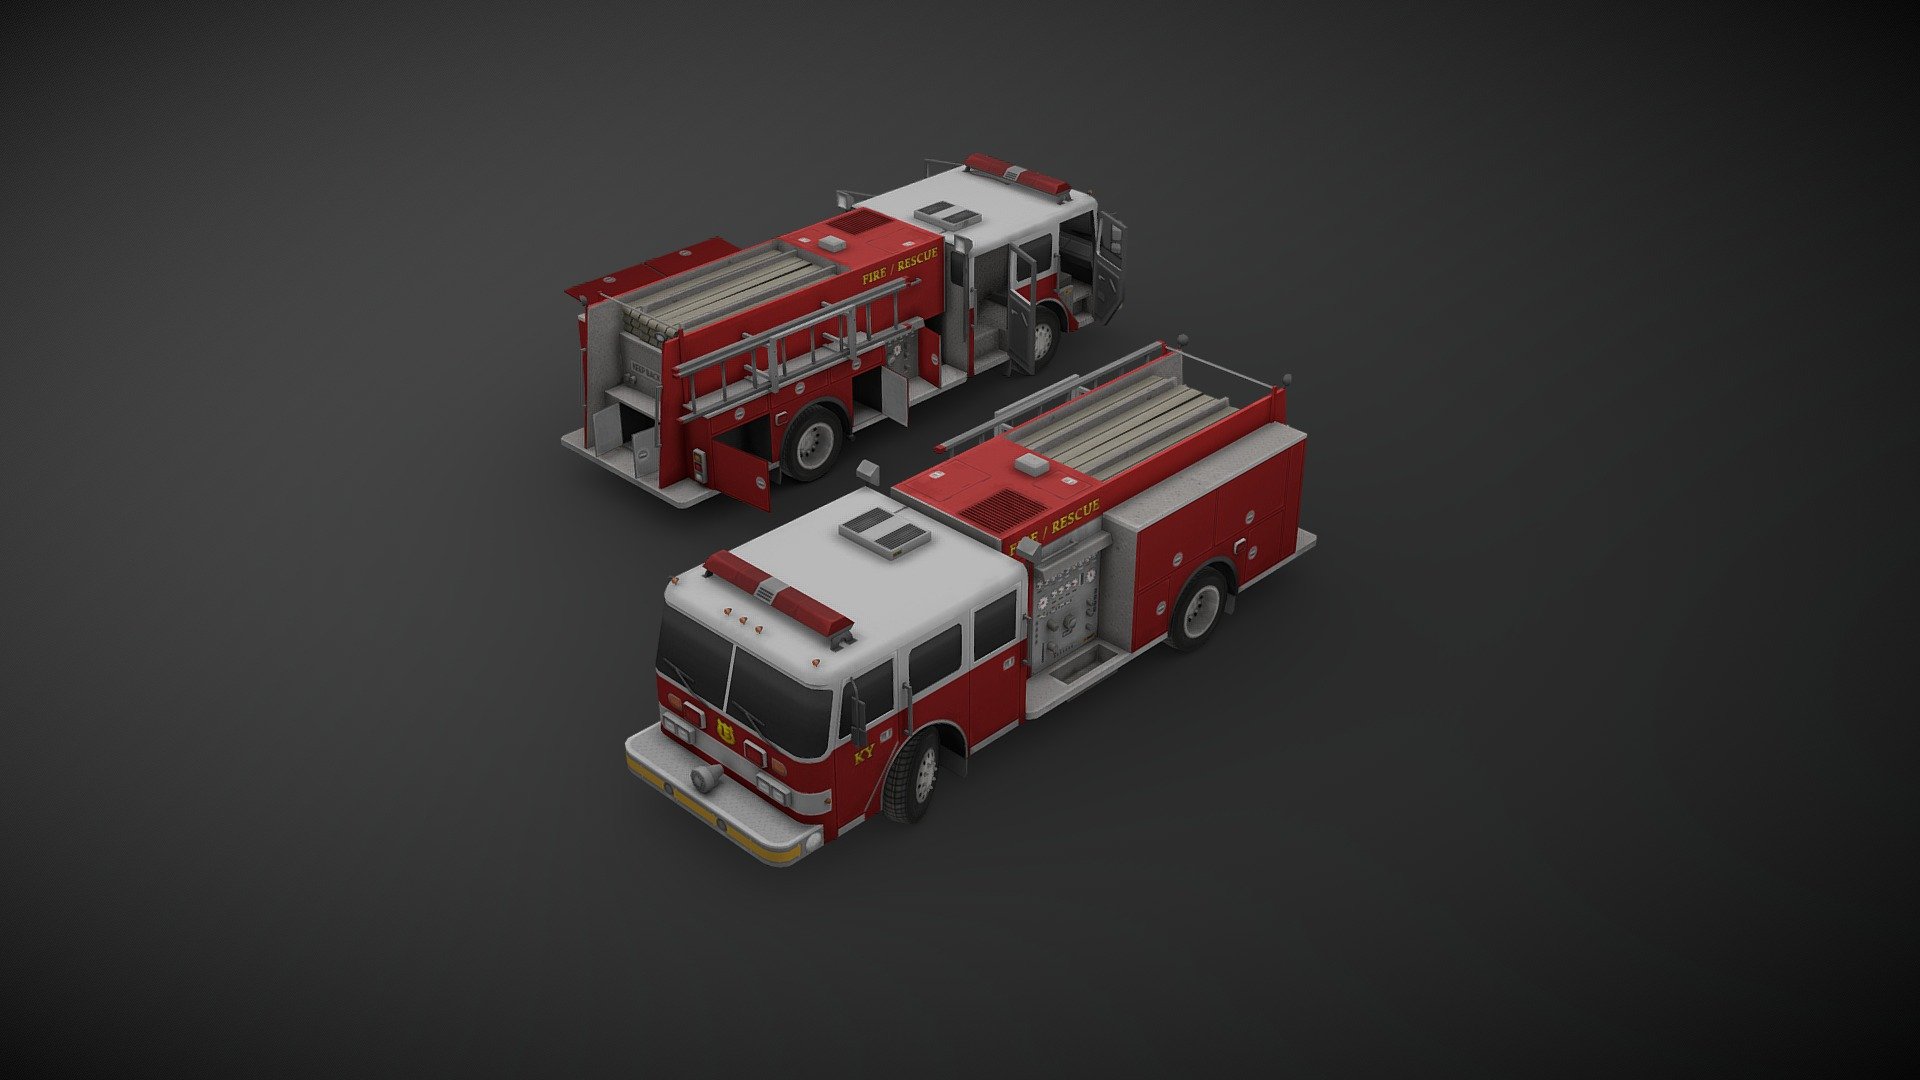 This is a start of a small series of emergency vehicles, this one is a showcase of a 1990 Pierce Arrow Pumper I’ve made for project ZOMBOID, low poly but with a high detail texture, optimized for game engine. This version is not a 100% true to the original since there are some compromises I’ve had to make to present it here.

You can find the actual version in project ZOMBOID STEAM Workshop 3d model